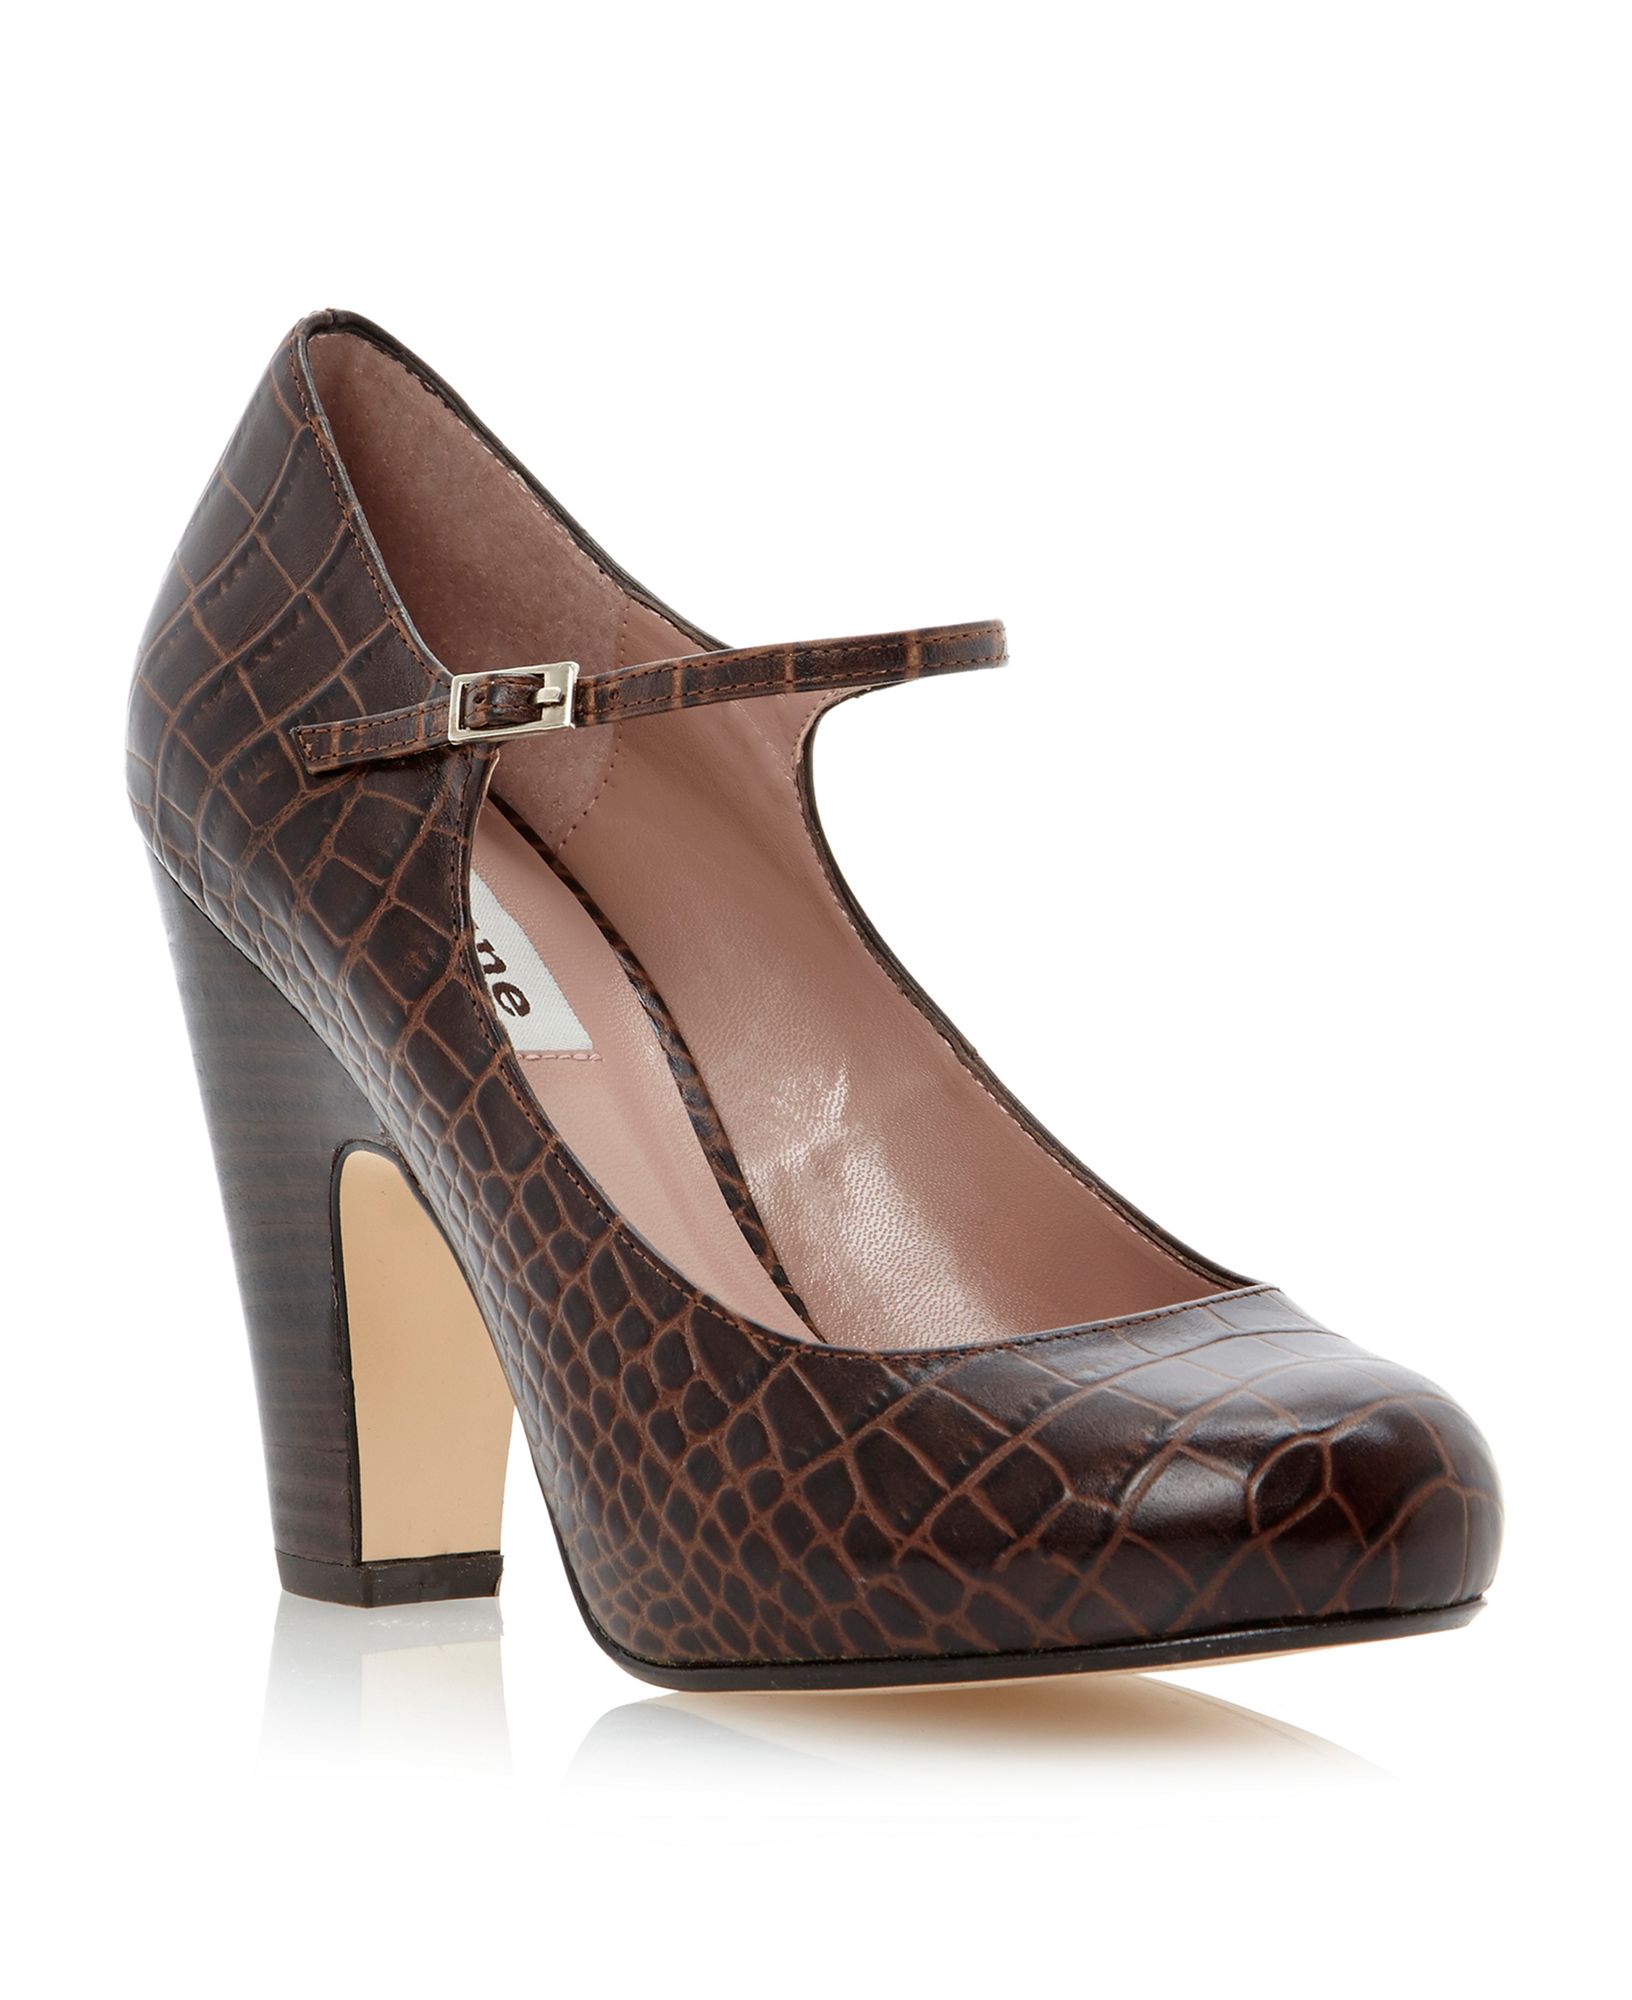 Dune Alchemy Block Heel Mary Jane Court Shoes in Brown (Tan) | Lyst